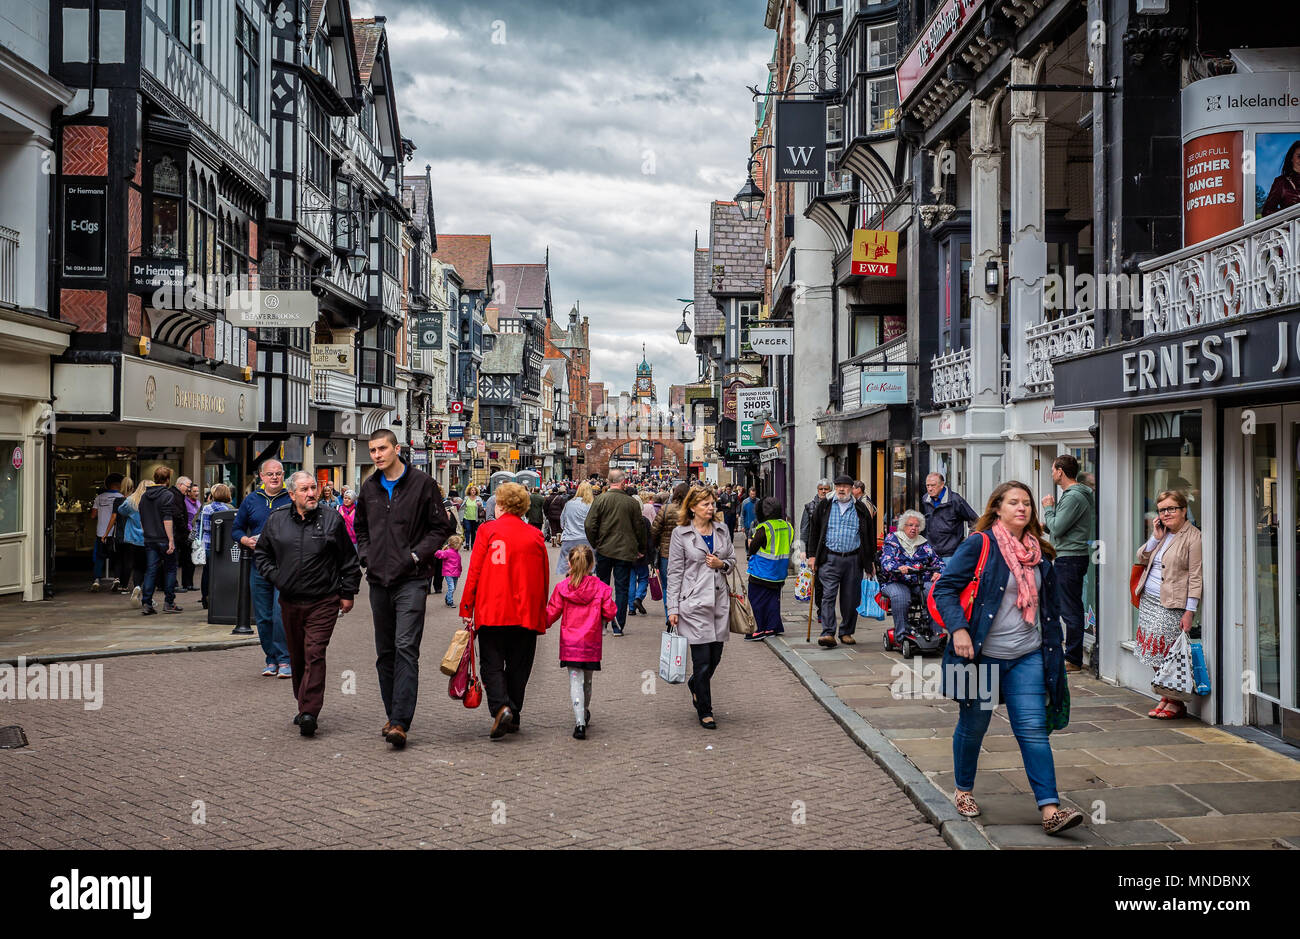 Eastgate Street in Chester, Cheshire, UK taken on 13 May 2017 Stock Photo